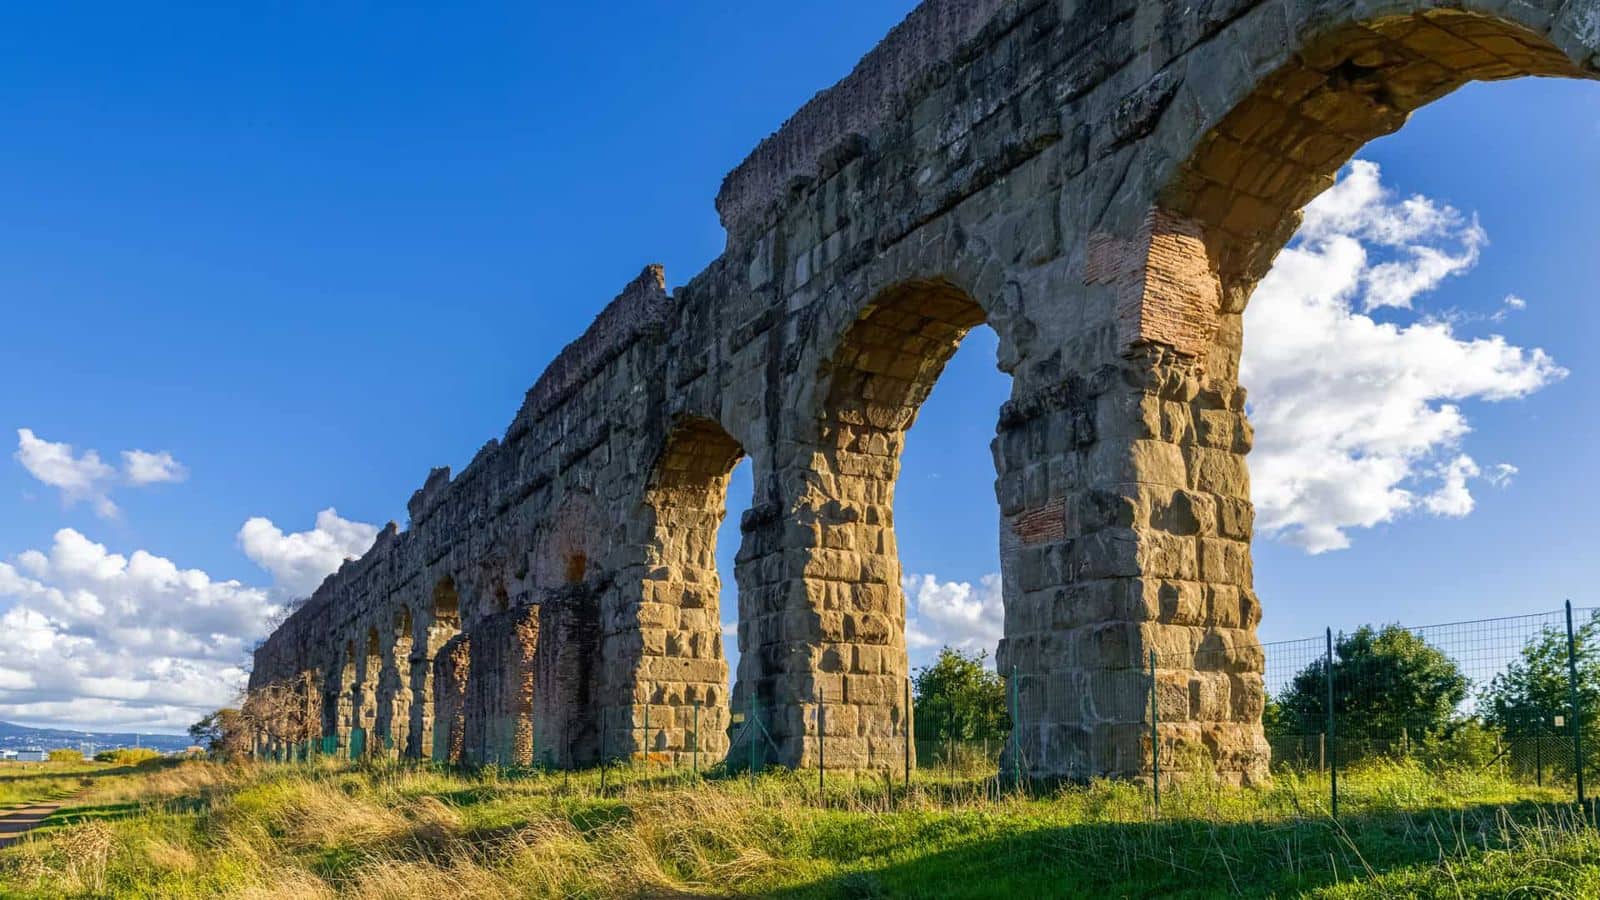 Rome's hidden archaeological gems that are worth exploring